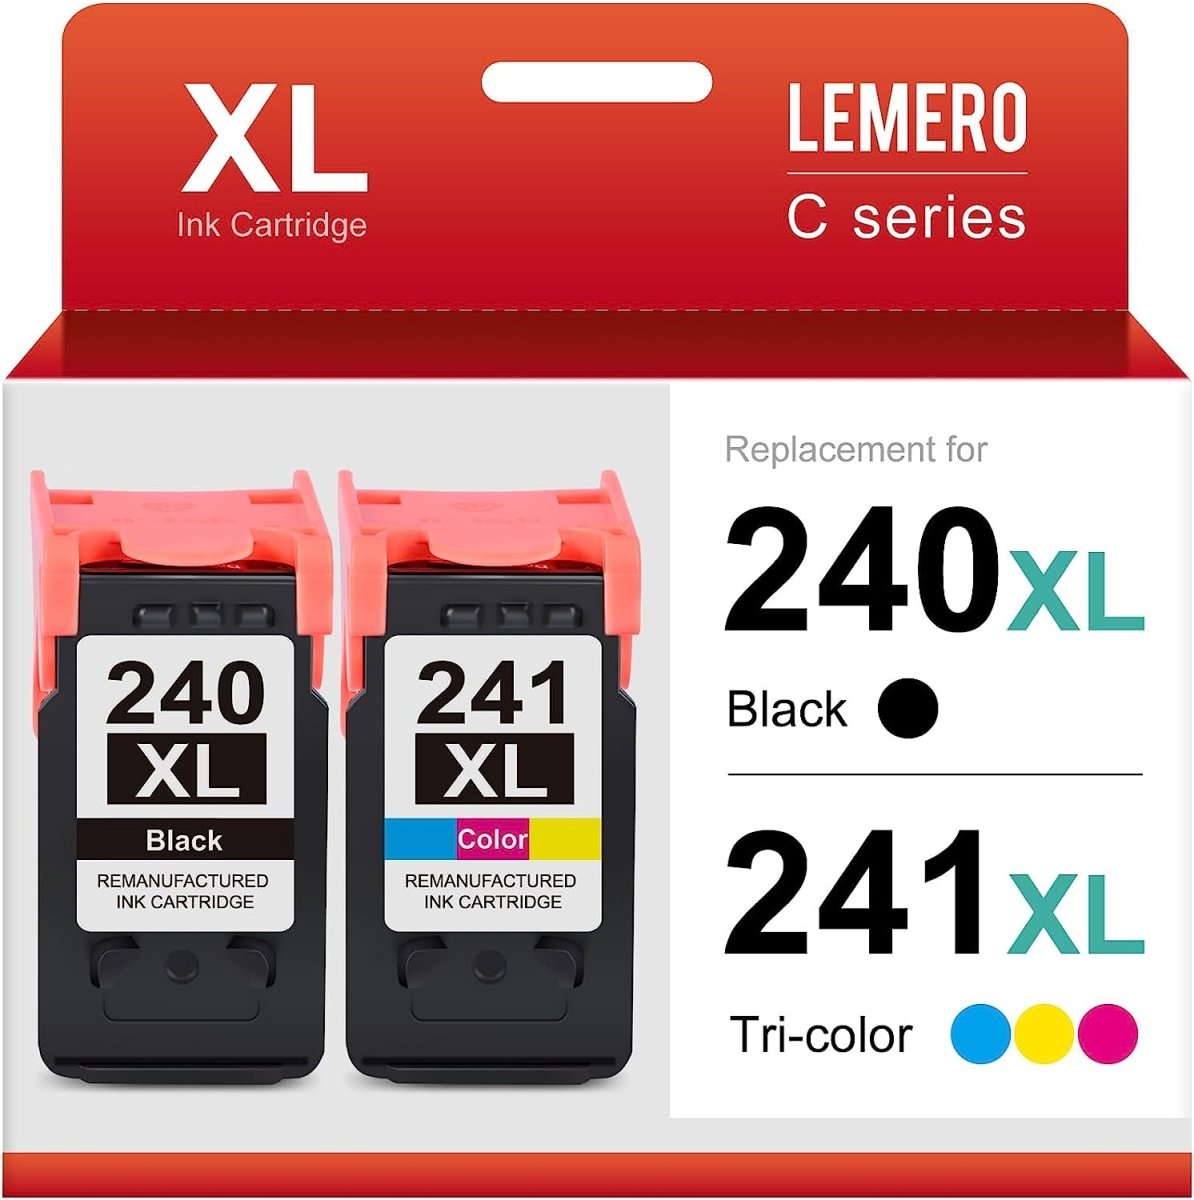 240XL 241XL Remanufactured Ink Cartridge for Canon (1 Black, 1 Tri-Color, Combo pack) - Linford Office:Printer Ink & Toner Cartridge